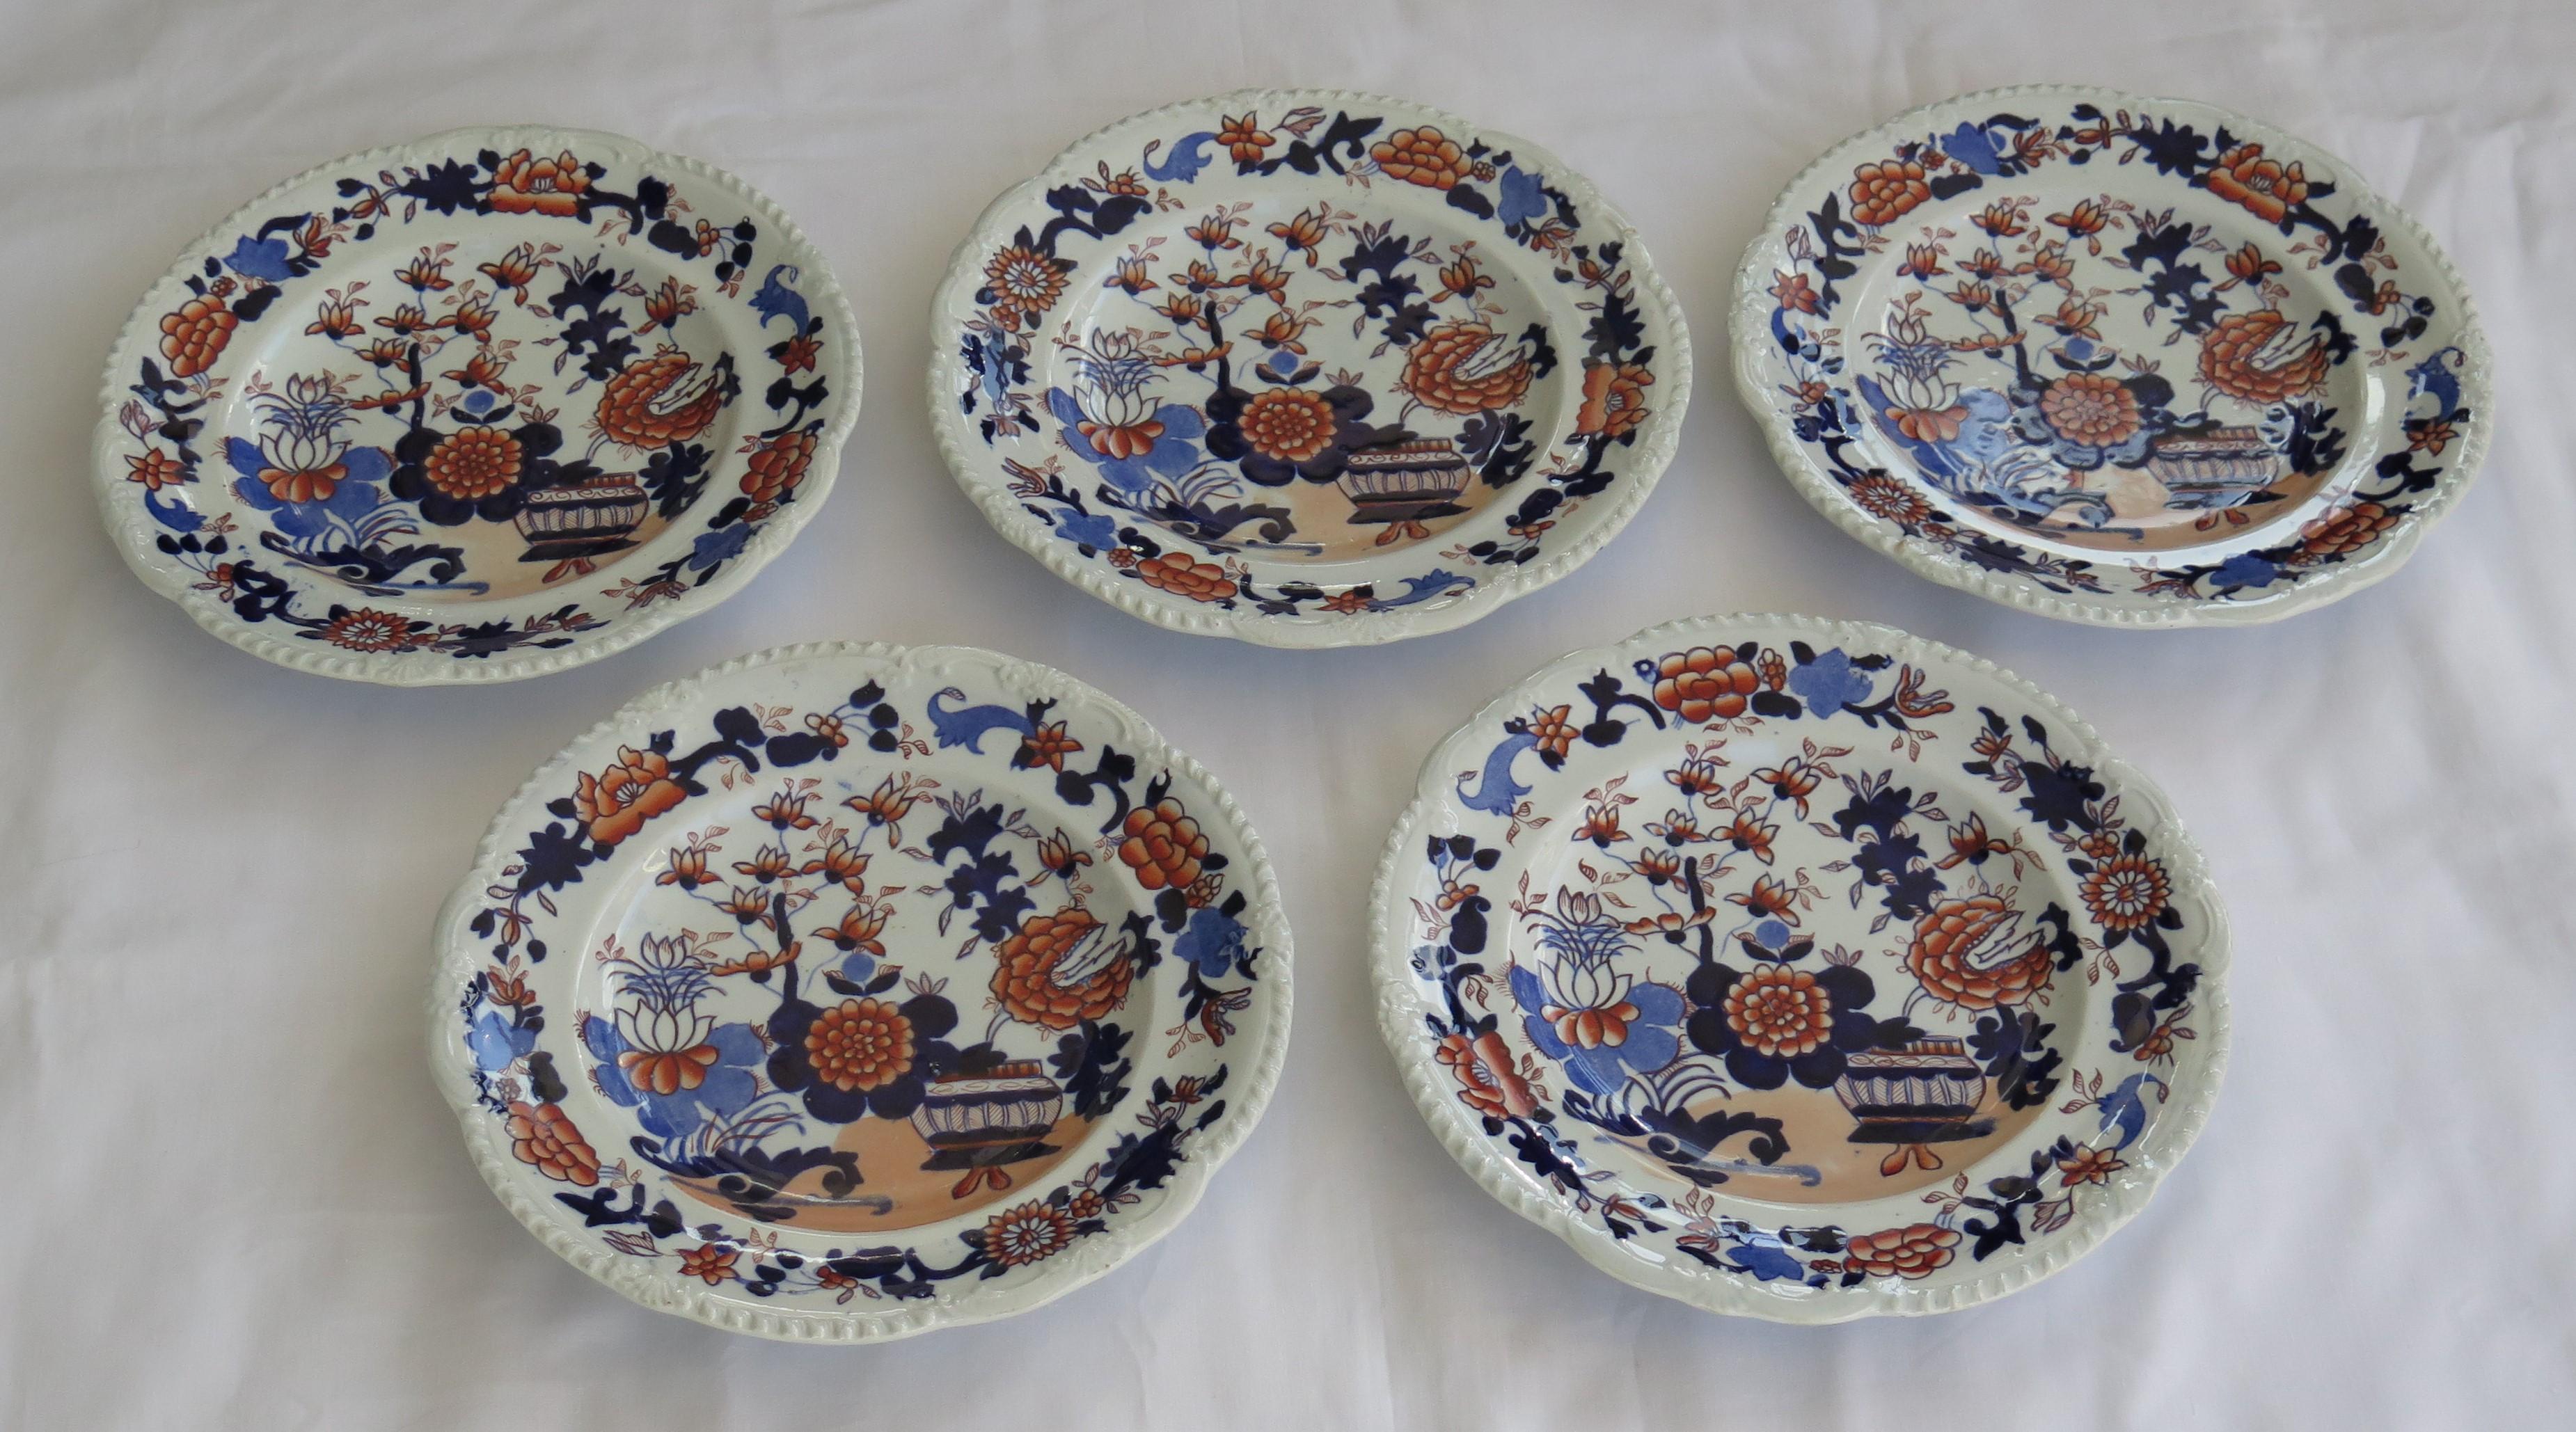 This is a good set of five early desert plates, all in the Basket Japan pattern, made by Mason's Ironstone, Lane Delph, England and dating to circa 1815-1820.

The plates are well potted with a circular shape, a moulded rim and sit on a low